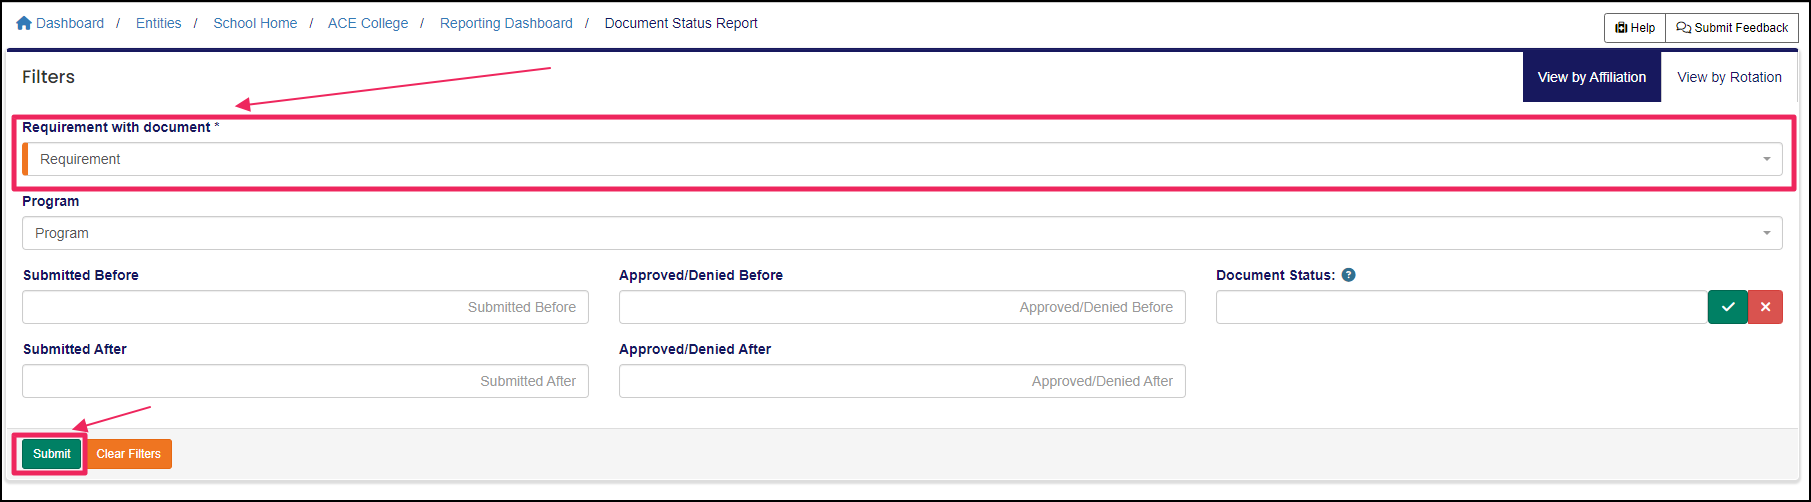 Image shows report filters including requirement with document filter and submit button.